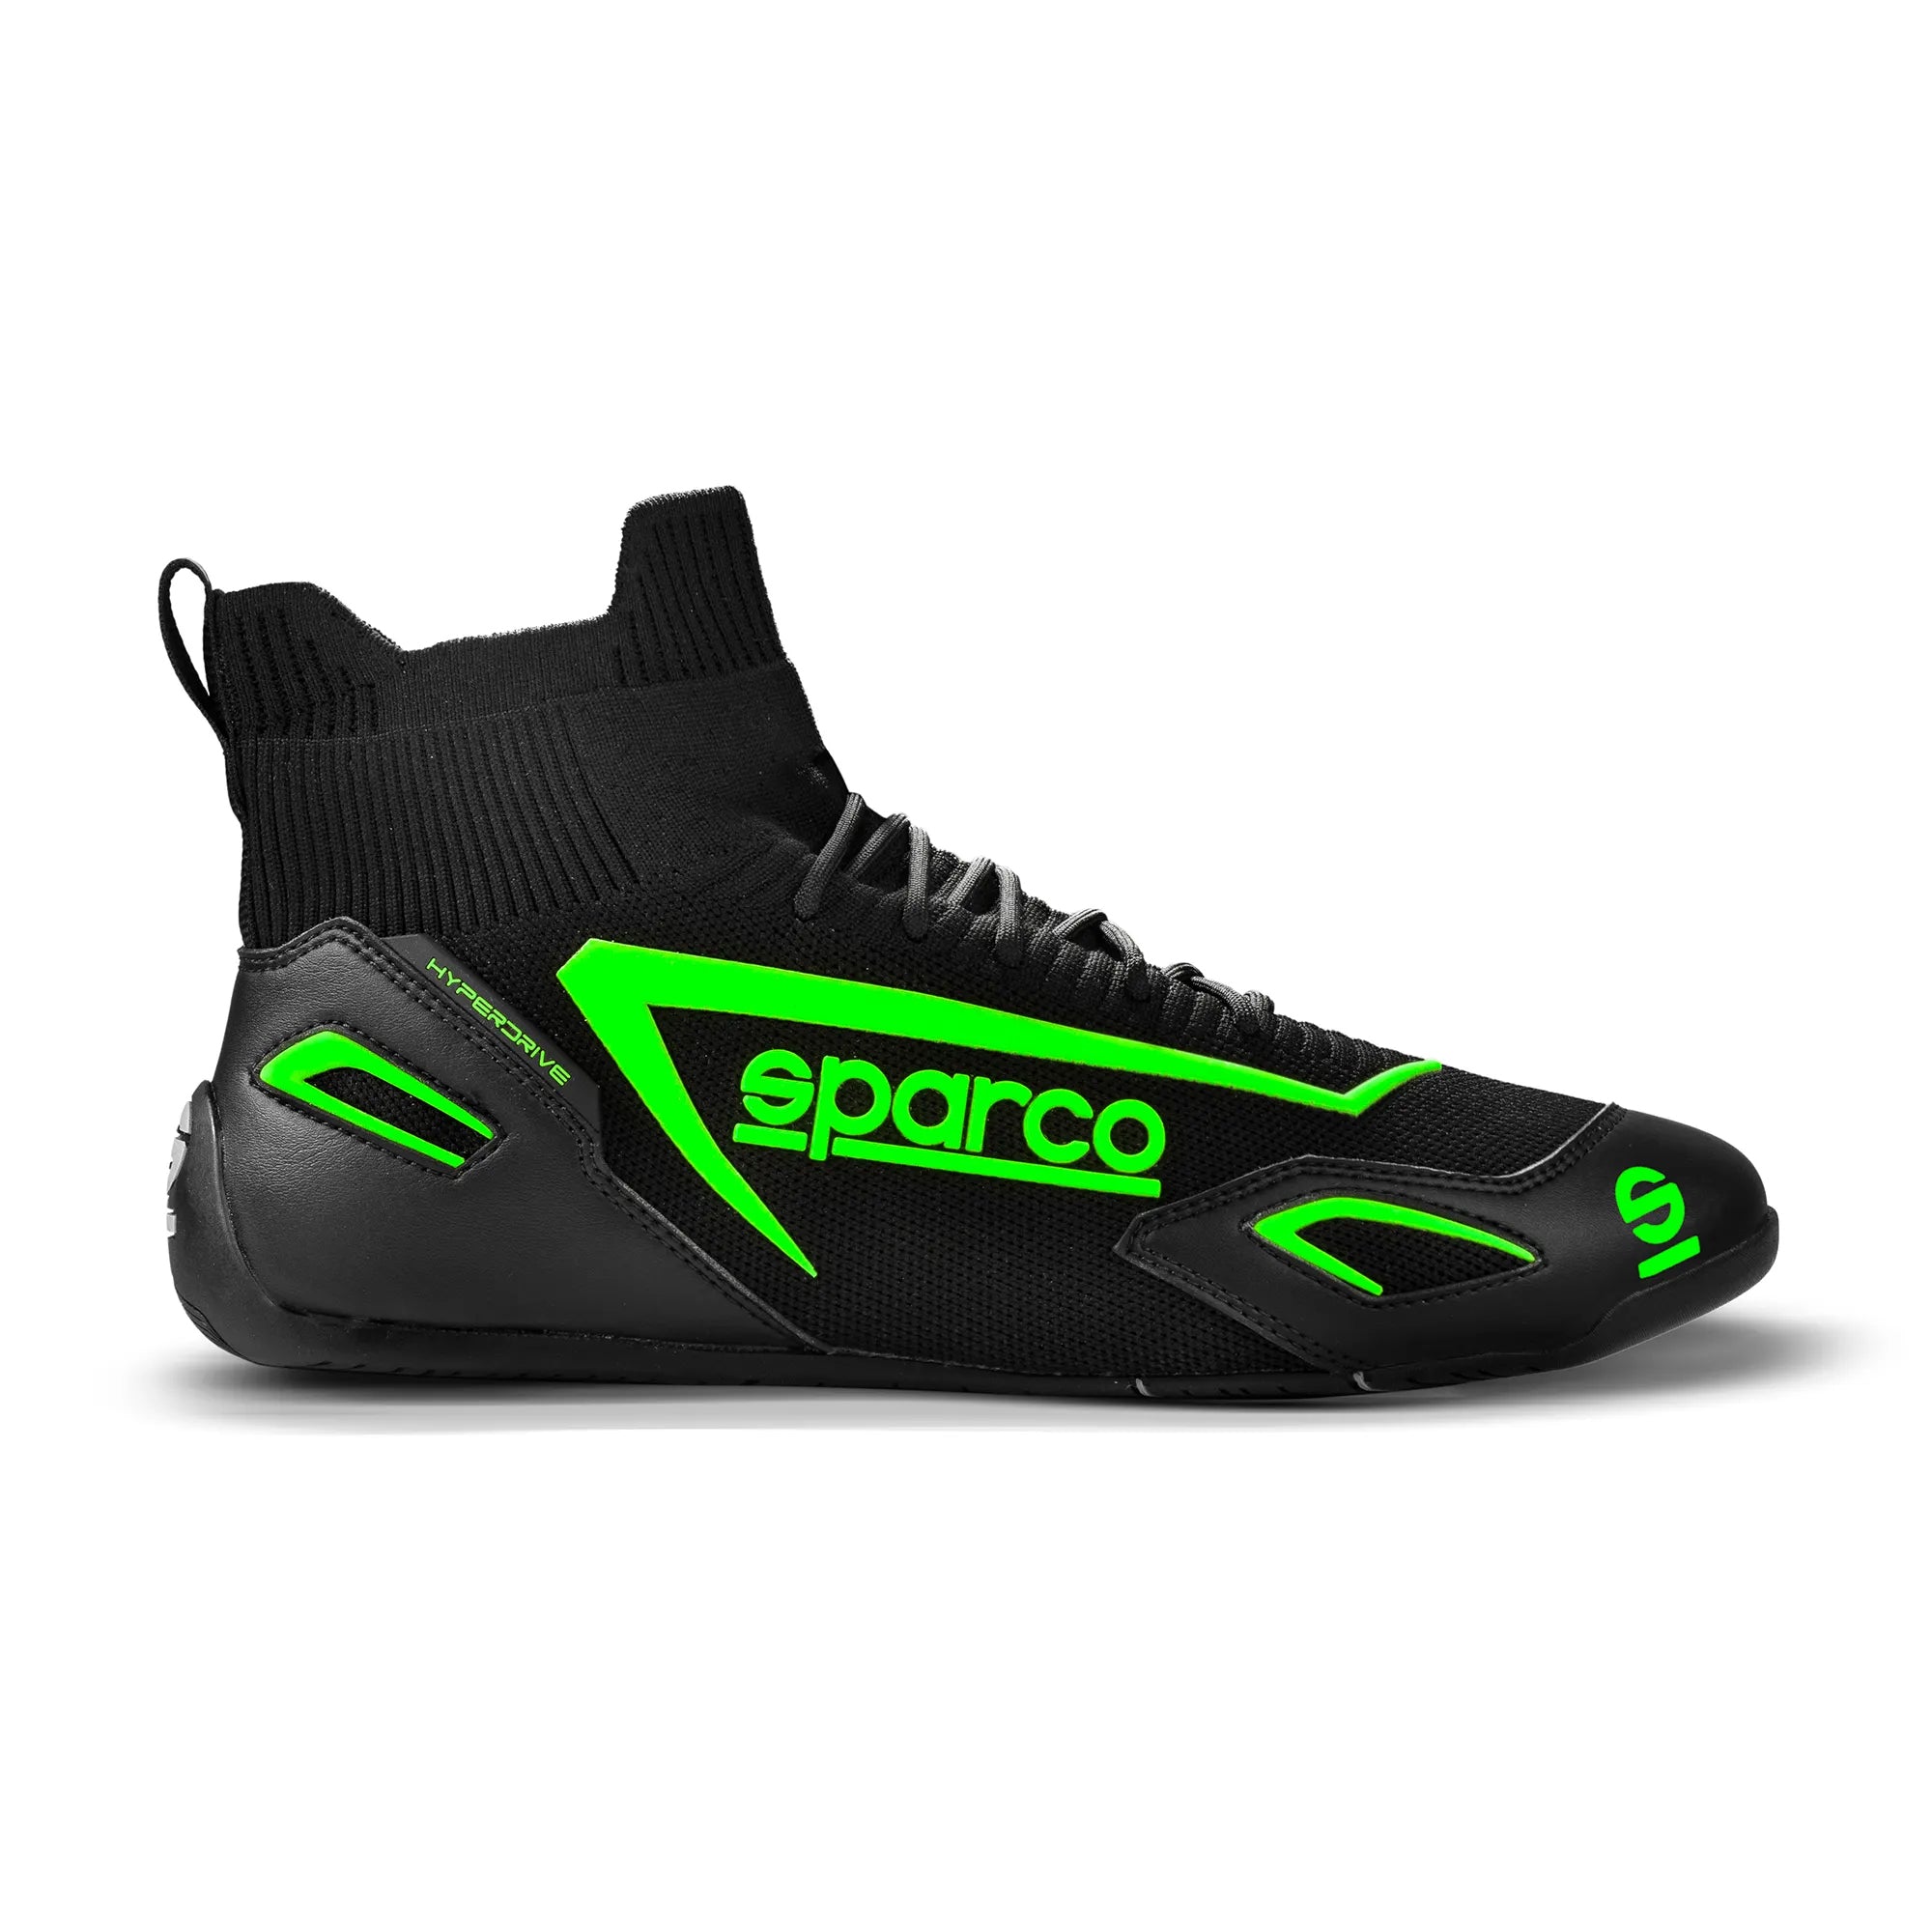 SPARCO 00129343NRVF Gaming sim racing shoes HYPERDRIVE, black/green, size 43 Photo-0 